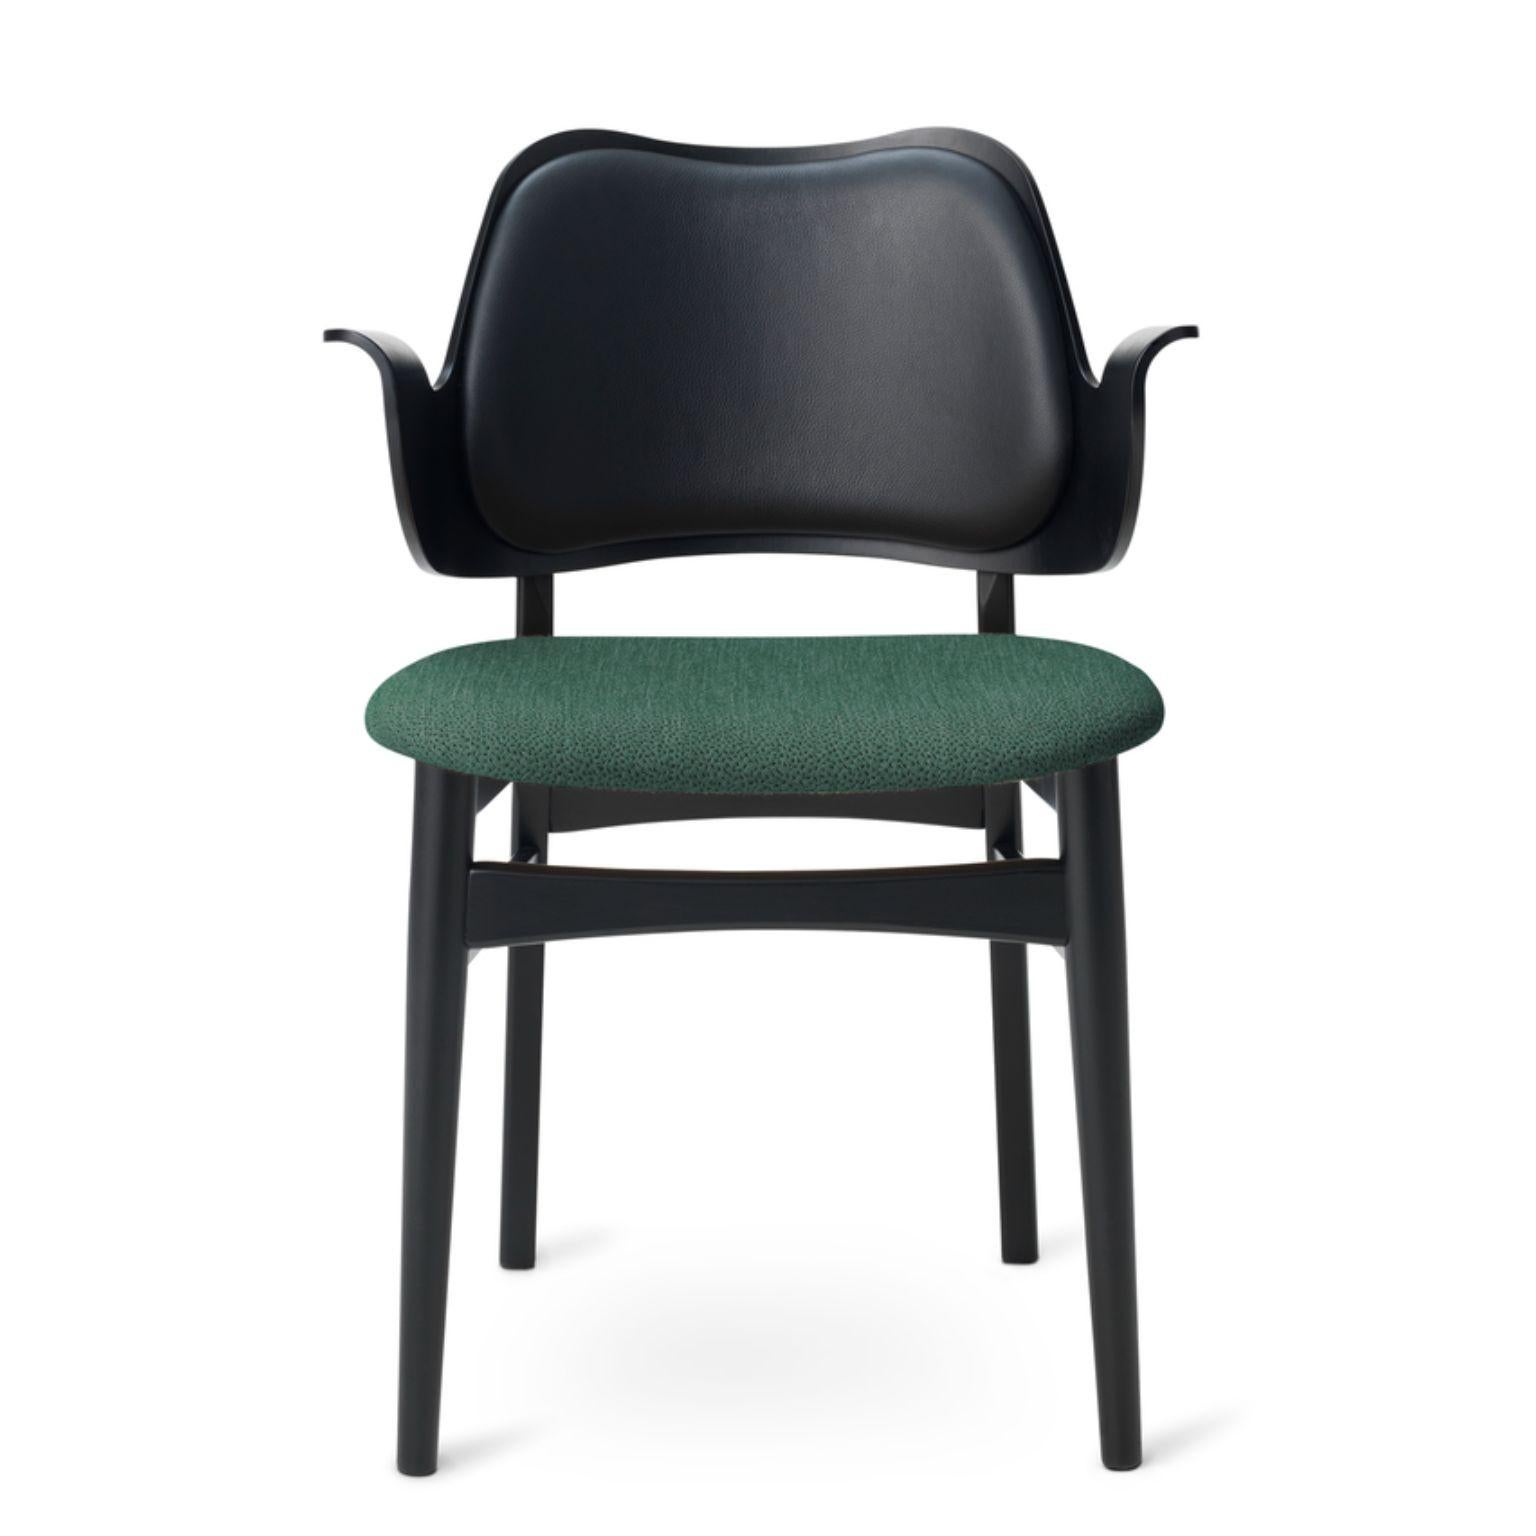 Gesture Chair Teak Oiled Oak Black Leather Hunter Green by Warm Nordic
Dimensions: D56 x W53 x H 80 cm
Material: Teak or white oiled solid oak, Black lacquered solid beech, Veneer seat and back, leather and textile upholstery
Weight: 7.5 kg
Also